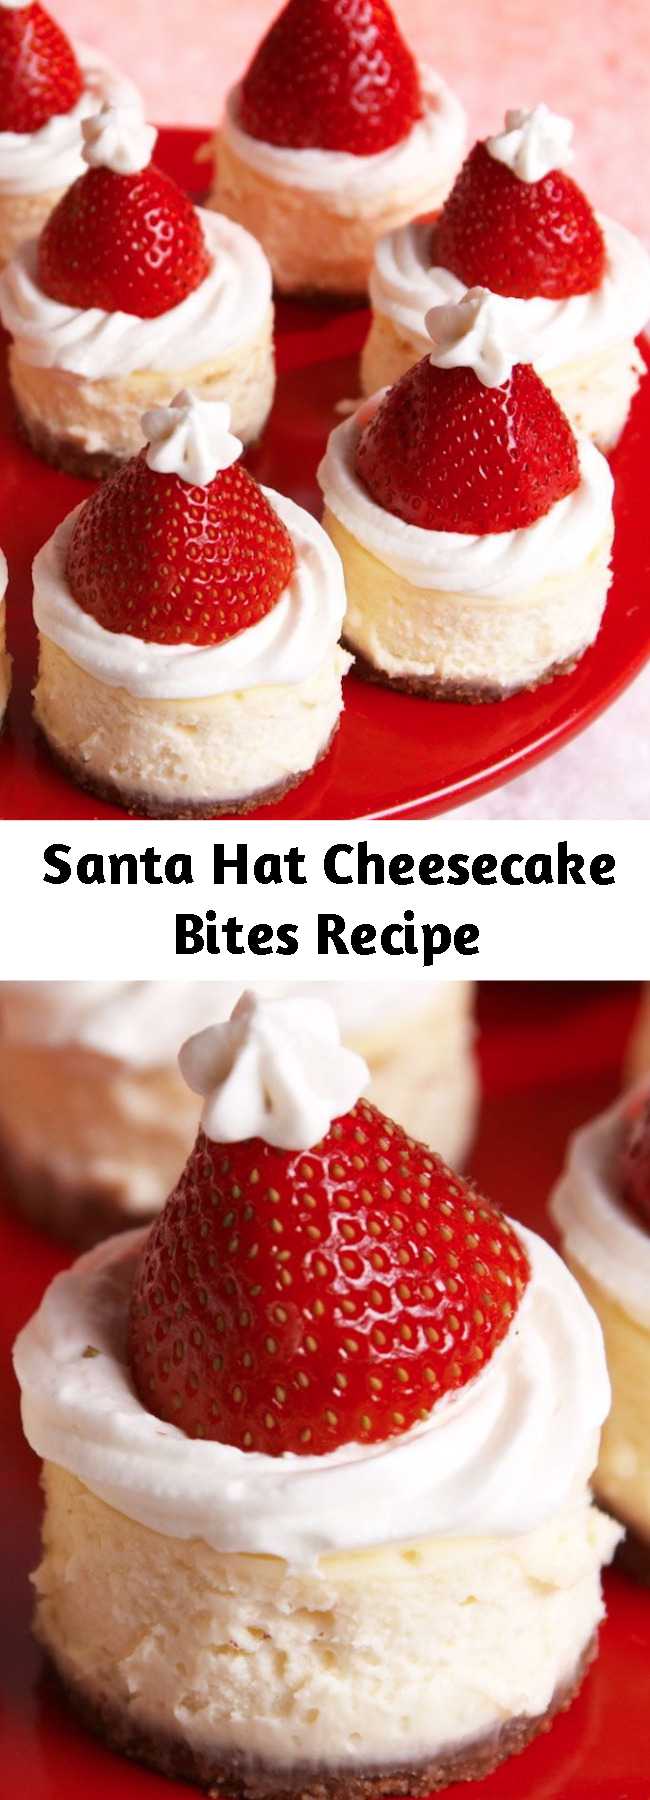 Santa Hat Cheesecake Bites Recipe - When Santa makes his list and checks it twice this year, we plan to be right at the top: these mini Santa cheesecake bites are the easiest way to show just how nice you are. #easy #recipe #cheesecake #bites #santa #hat #strawberry #hack #dessert #holiday #christmas